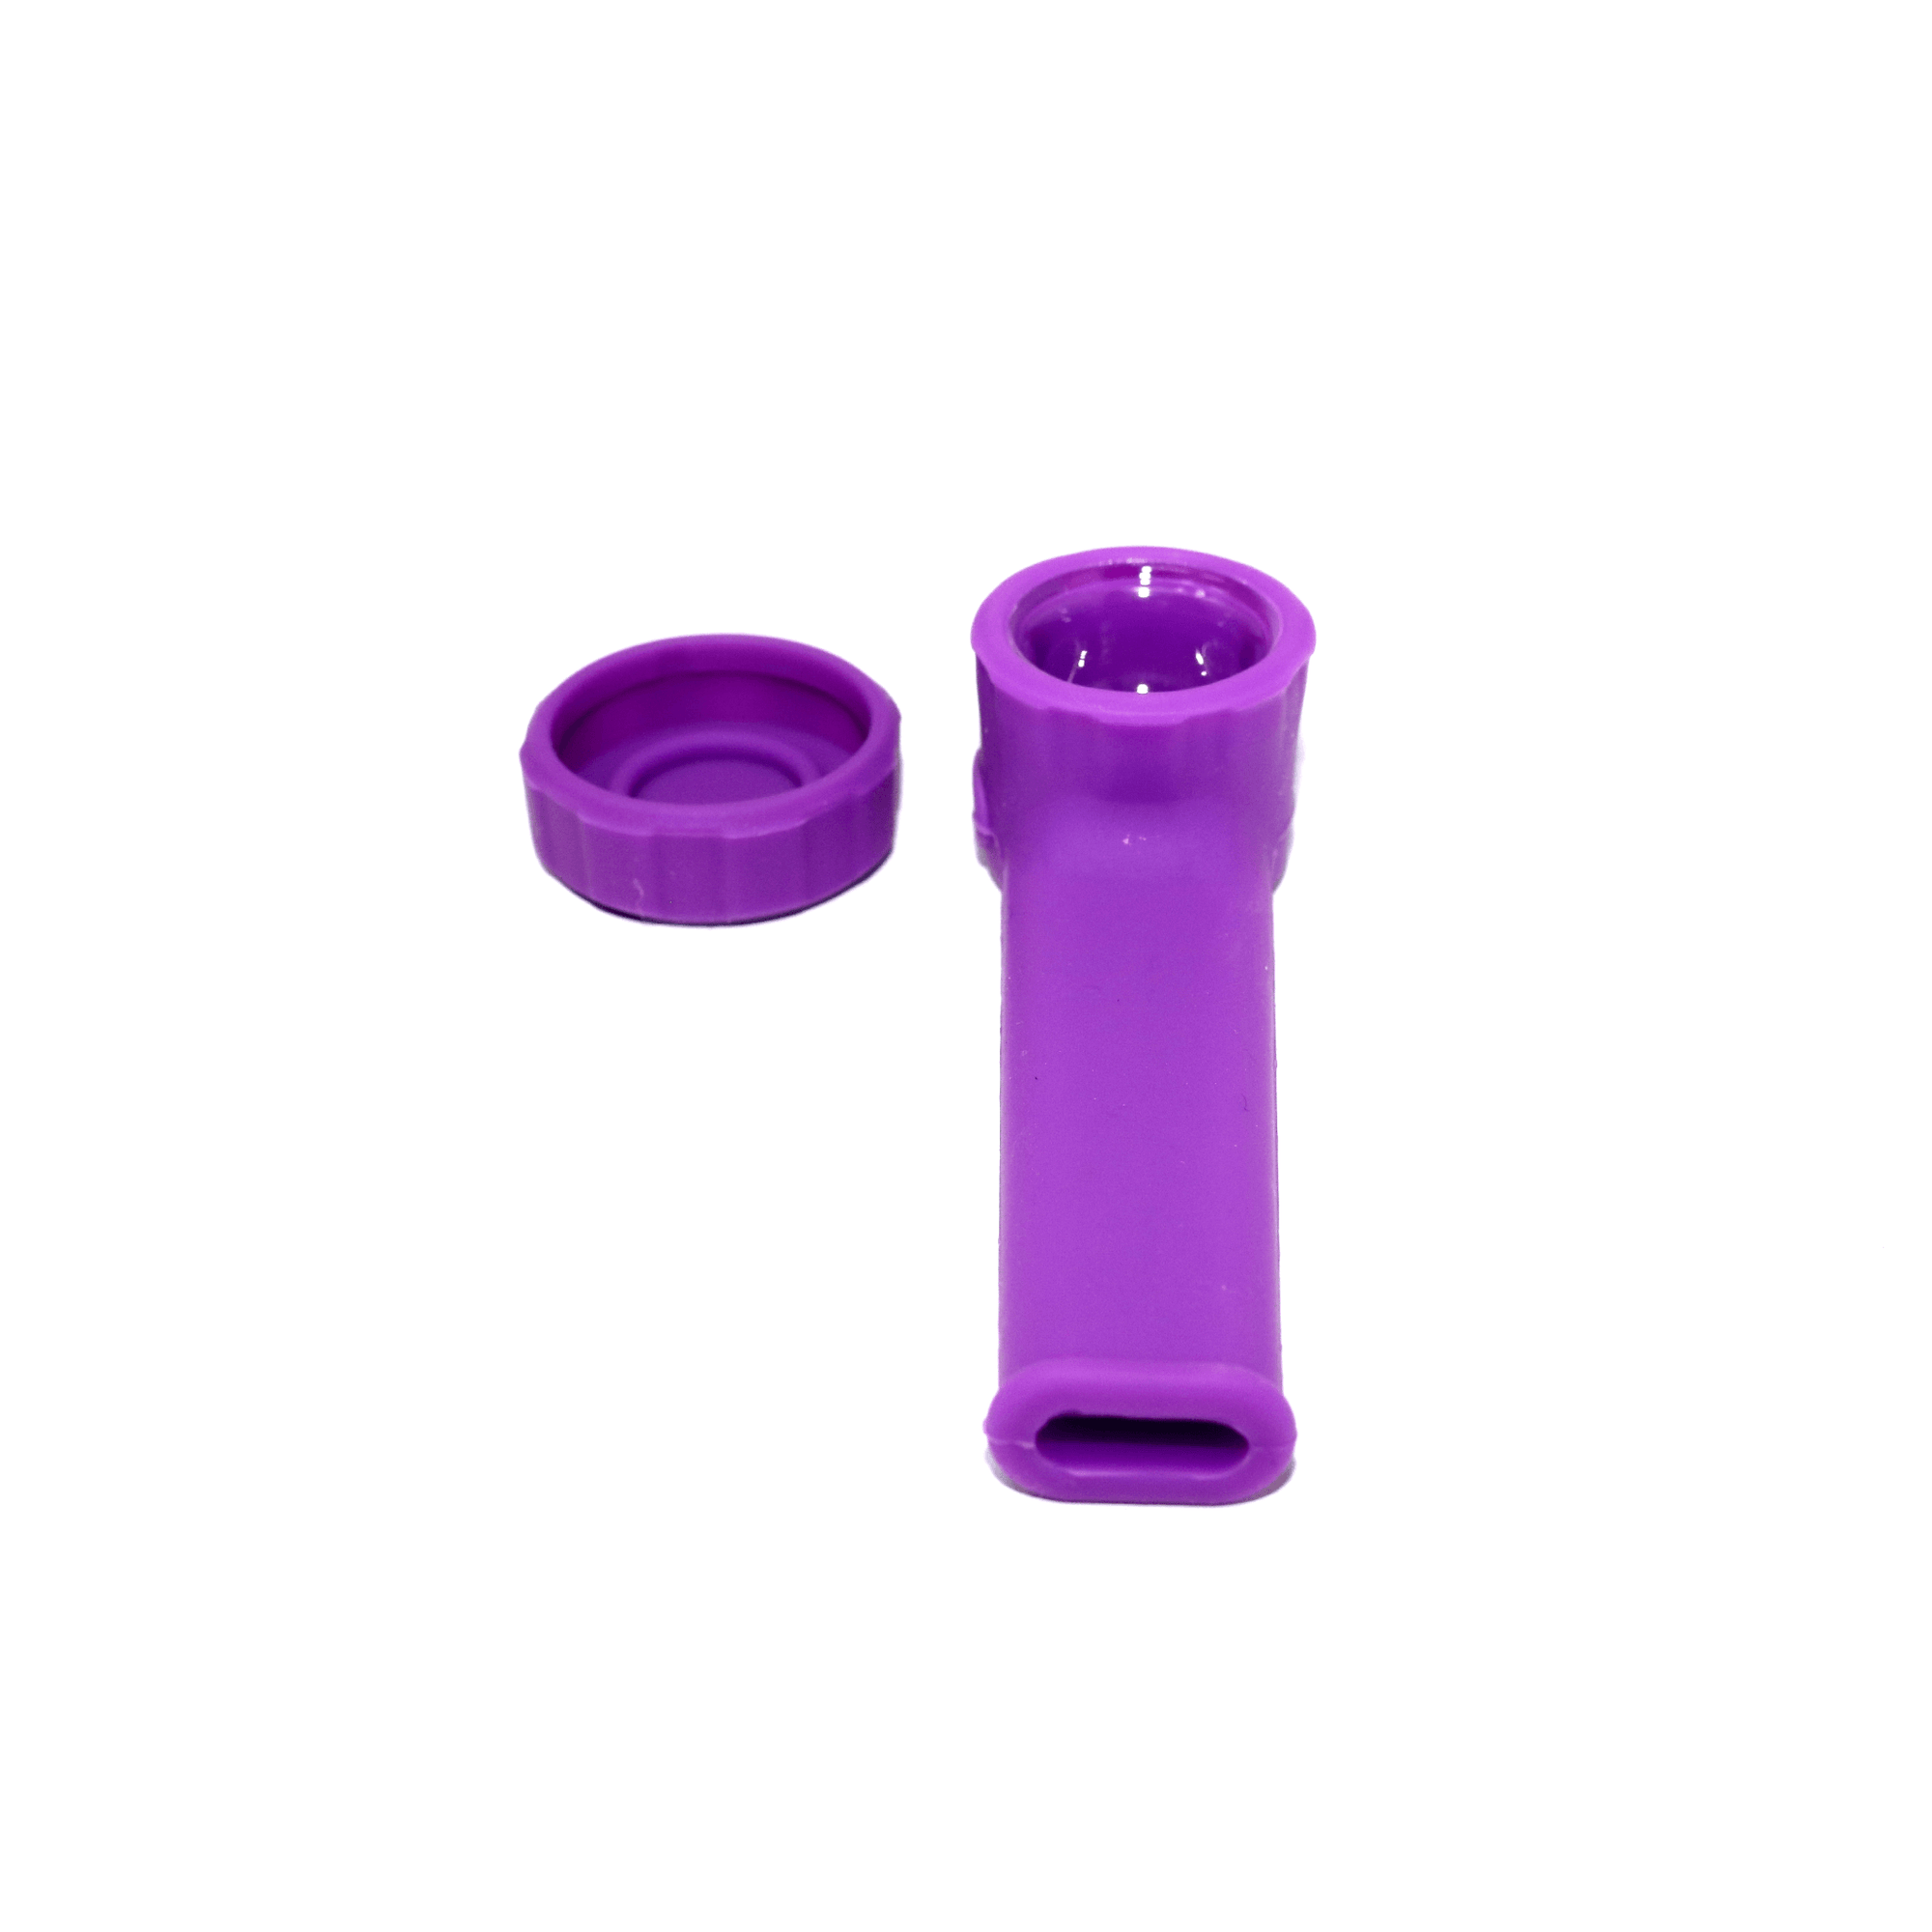 Large 4.5 Silicone Smoking Hand Pipe with Glass Bowl, Purple/Black, USA